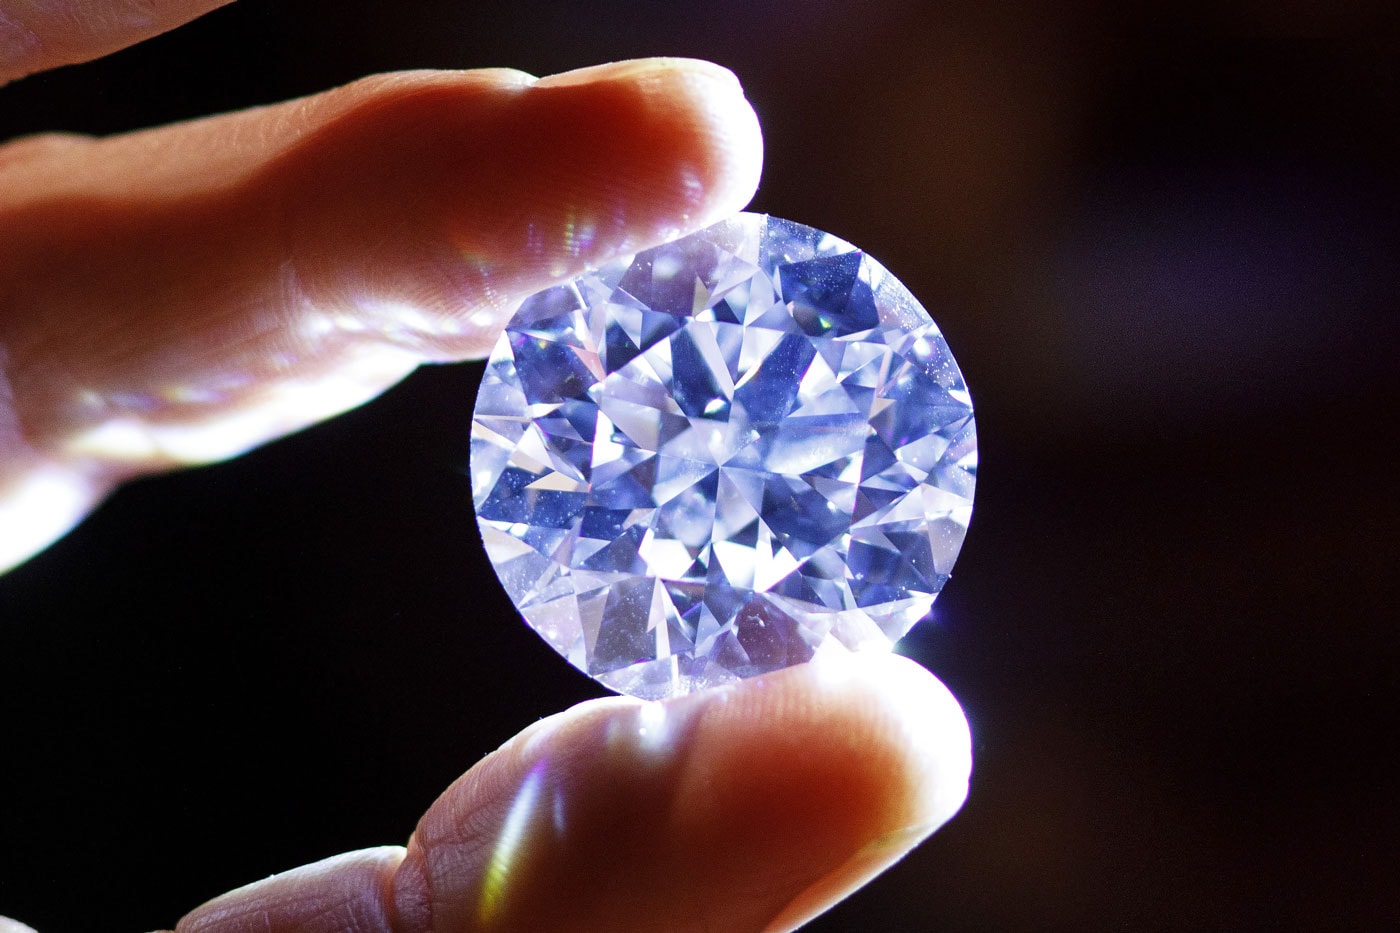 British Woman Finds 34 Carat Diamond Worth Over $2 Million USD During Her Fall Cleaning northumberland home uk jewelry precious stones gem stones featonby's auctioneers 